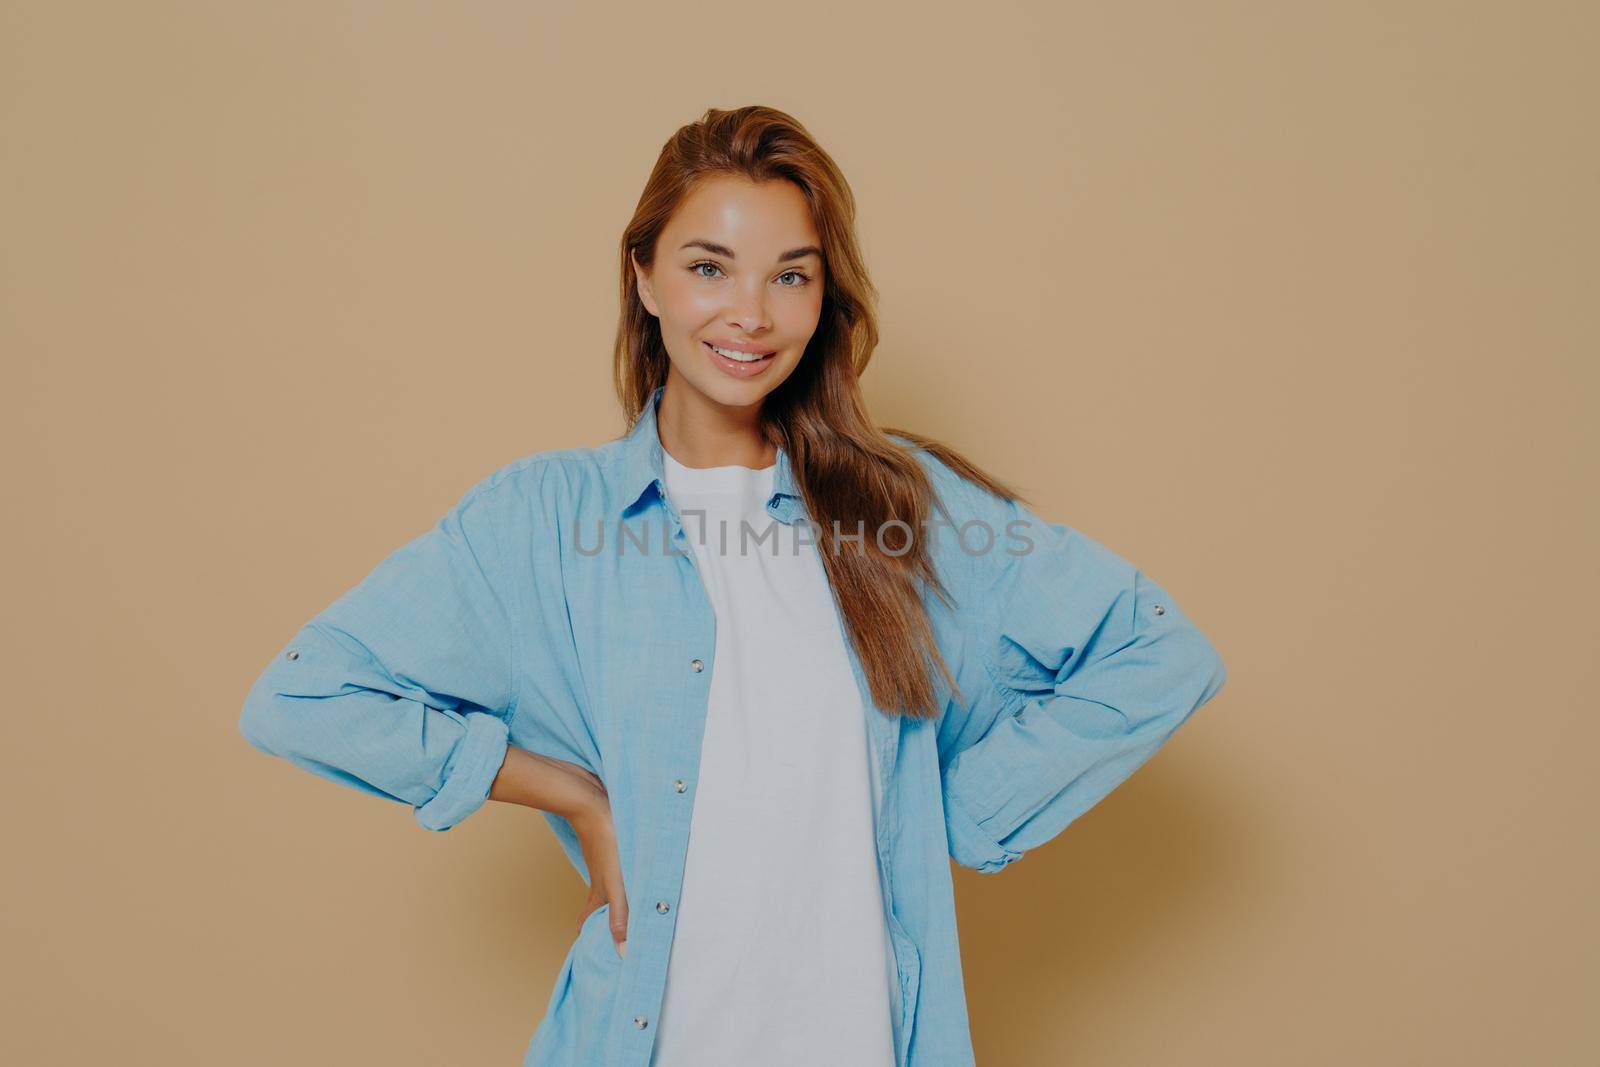 Self assured smiling lovely model keeps hands on waist, wears long blue shirt over white tshirt, looks directly at camera, expresses her right, isolated over beige background. Self confidence concept